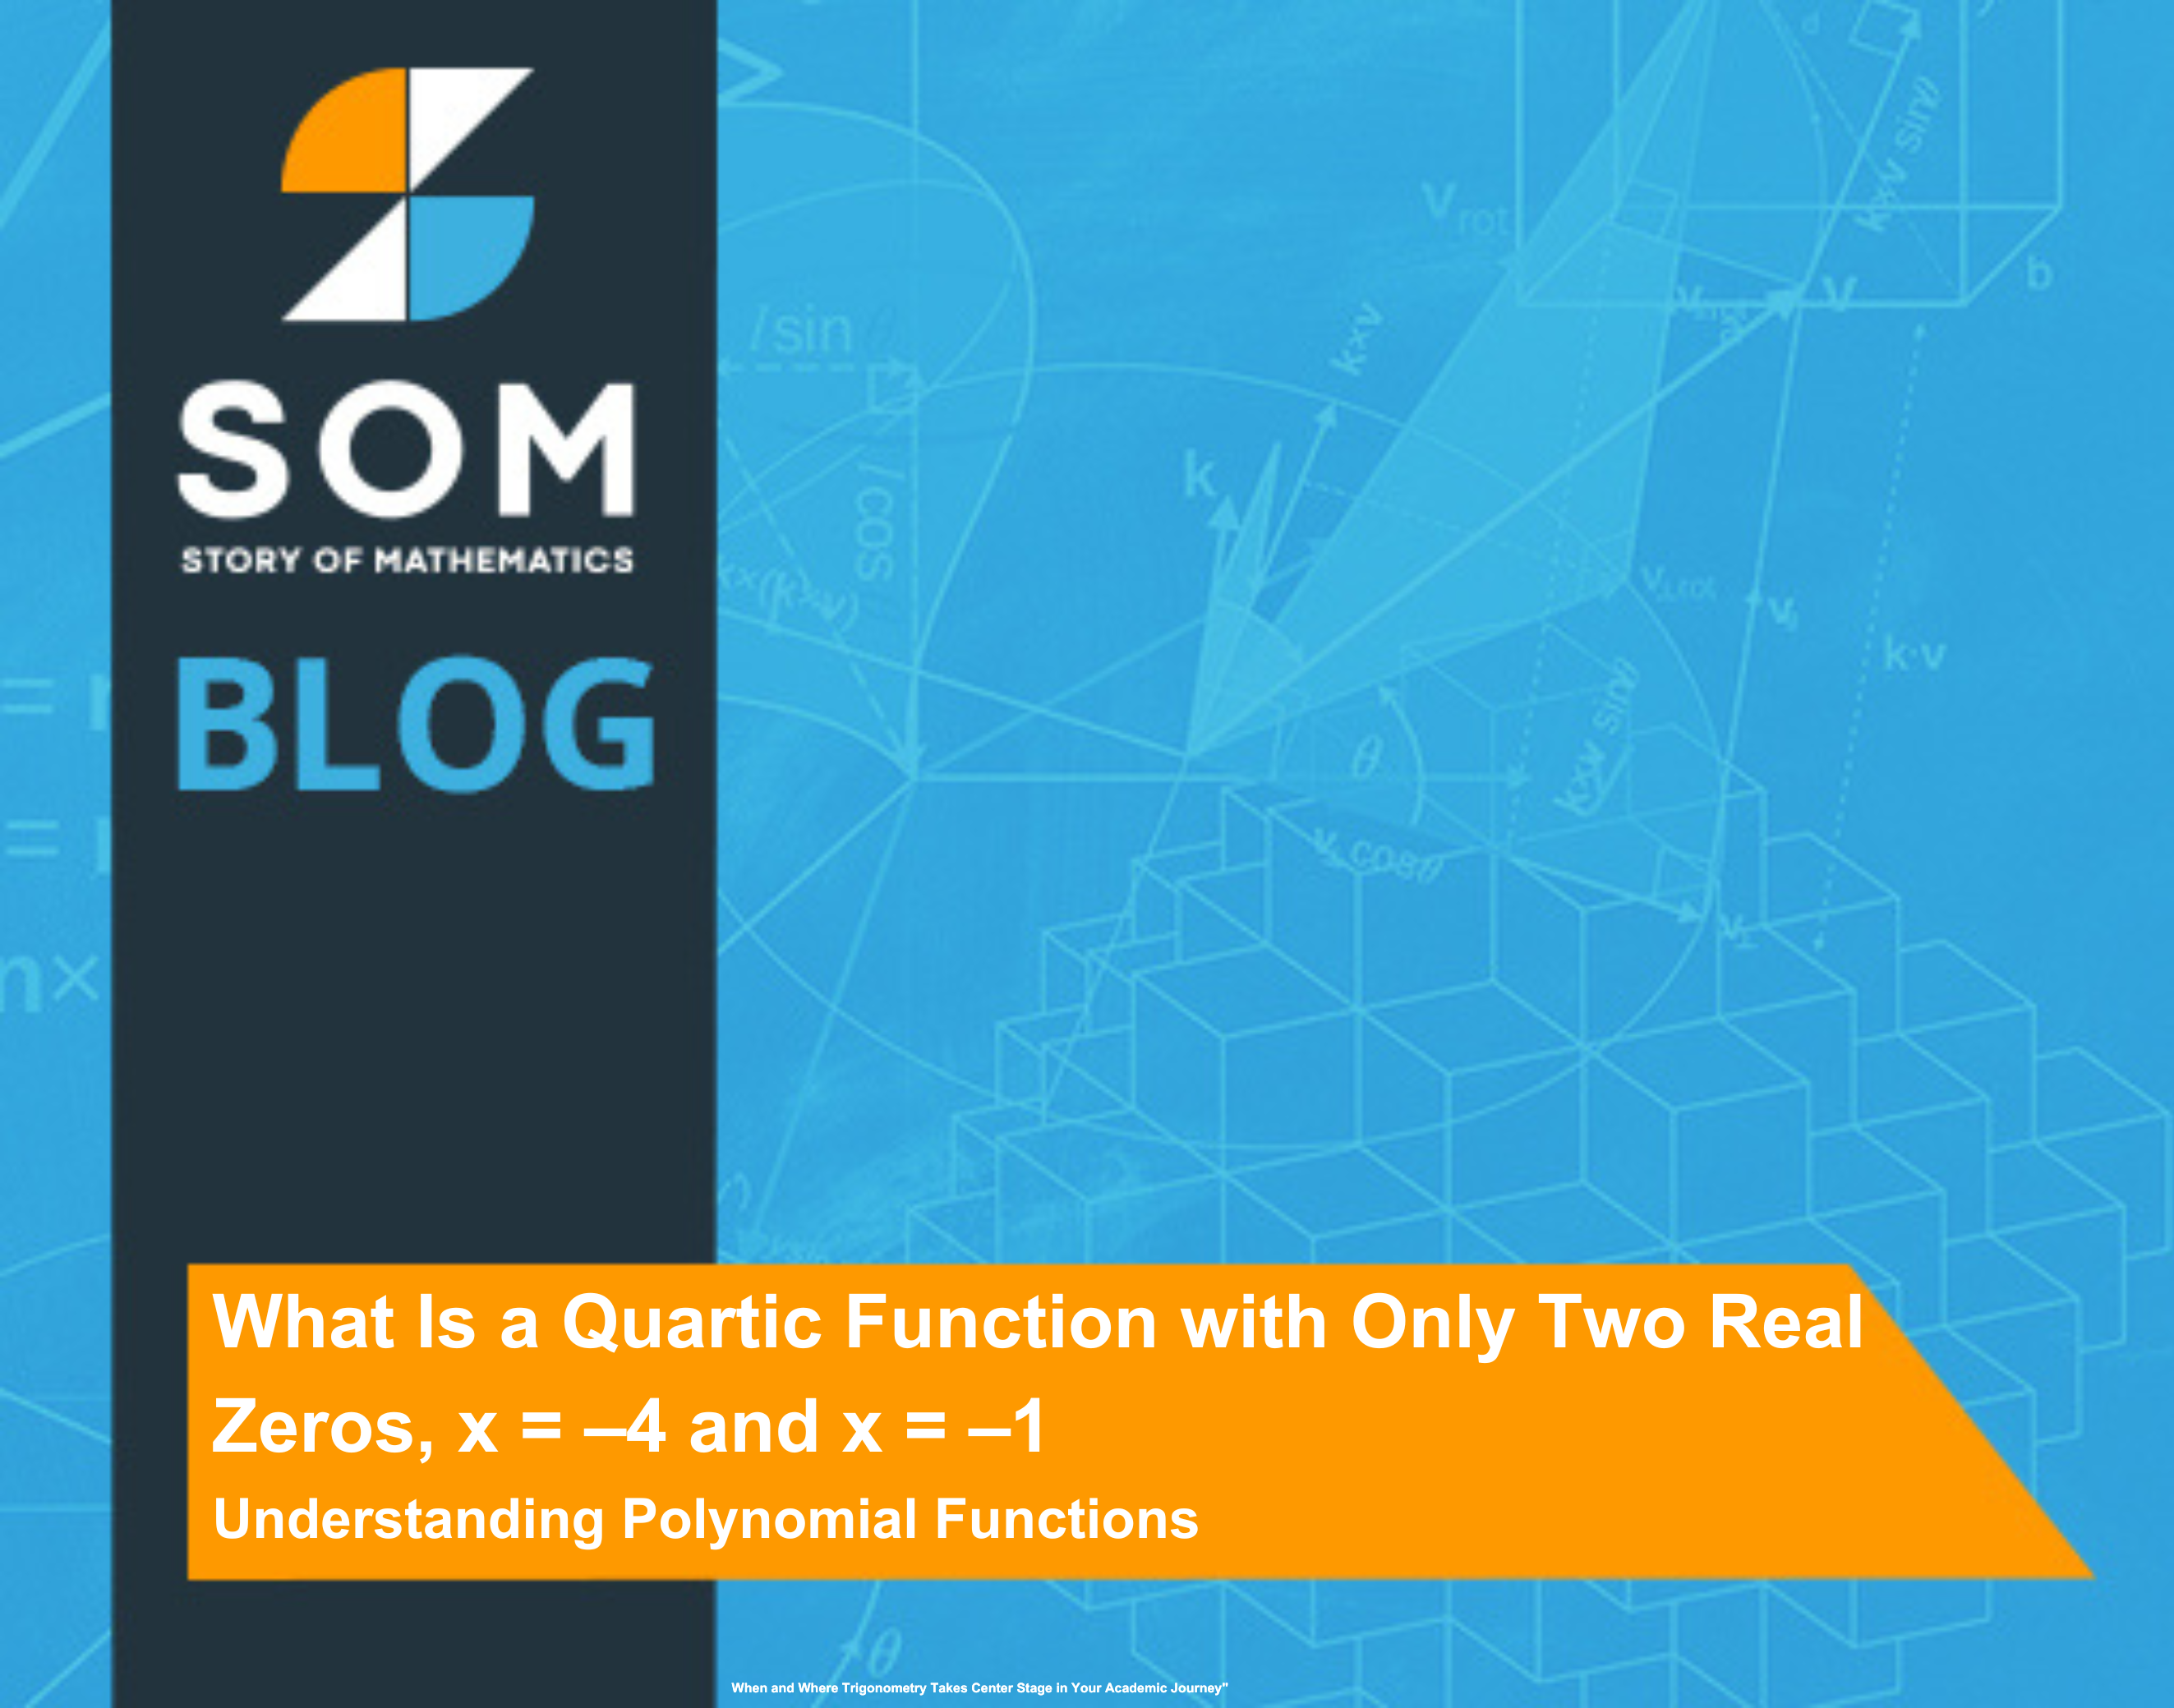 Feature Image What Is a Quartic Function with Only Two Real Zeros, x = –4 and x = –1 Understanding Polynomial Functions